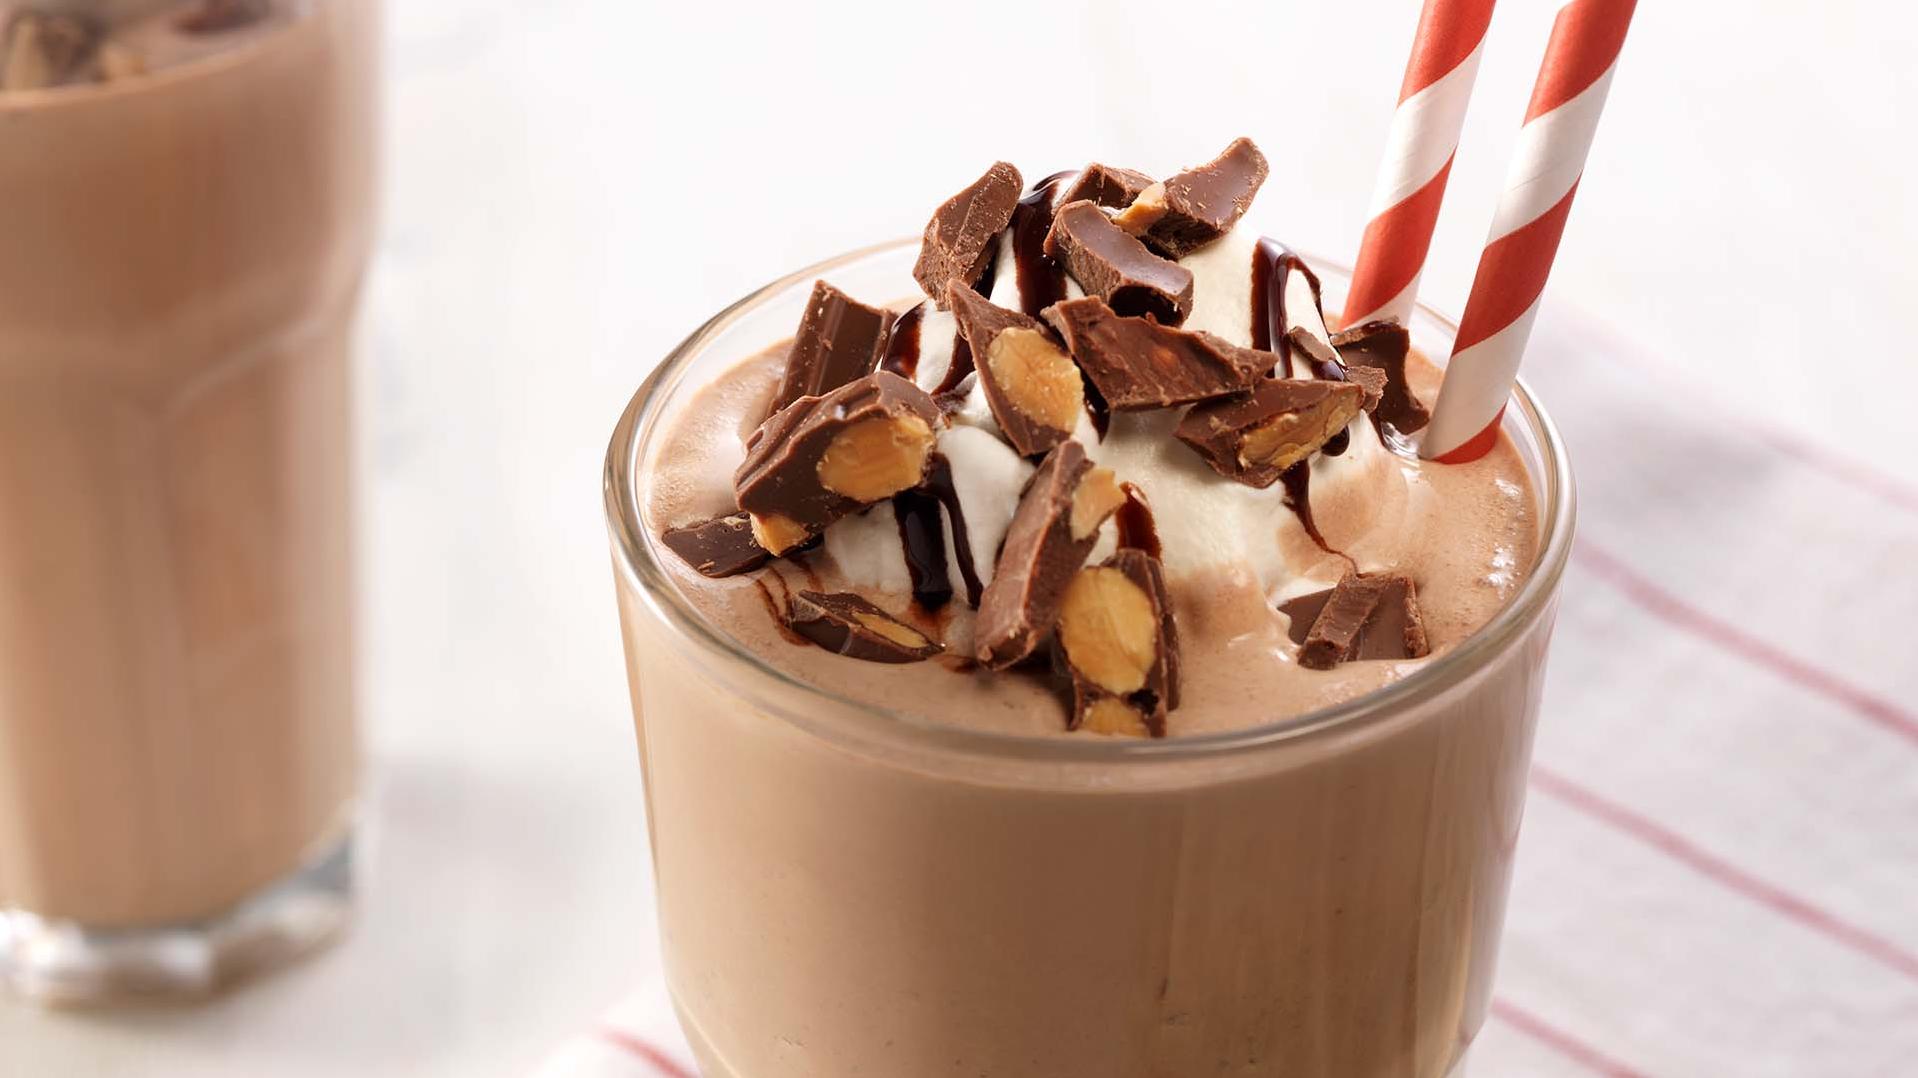  Don't settle for a mediocre milkshake, make one that tastes homemade with our recipe!